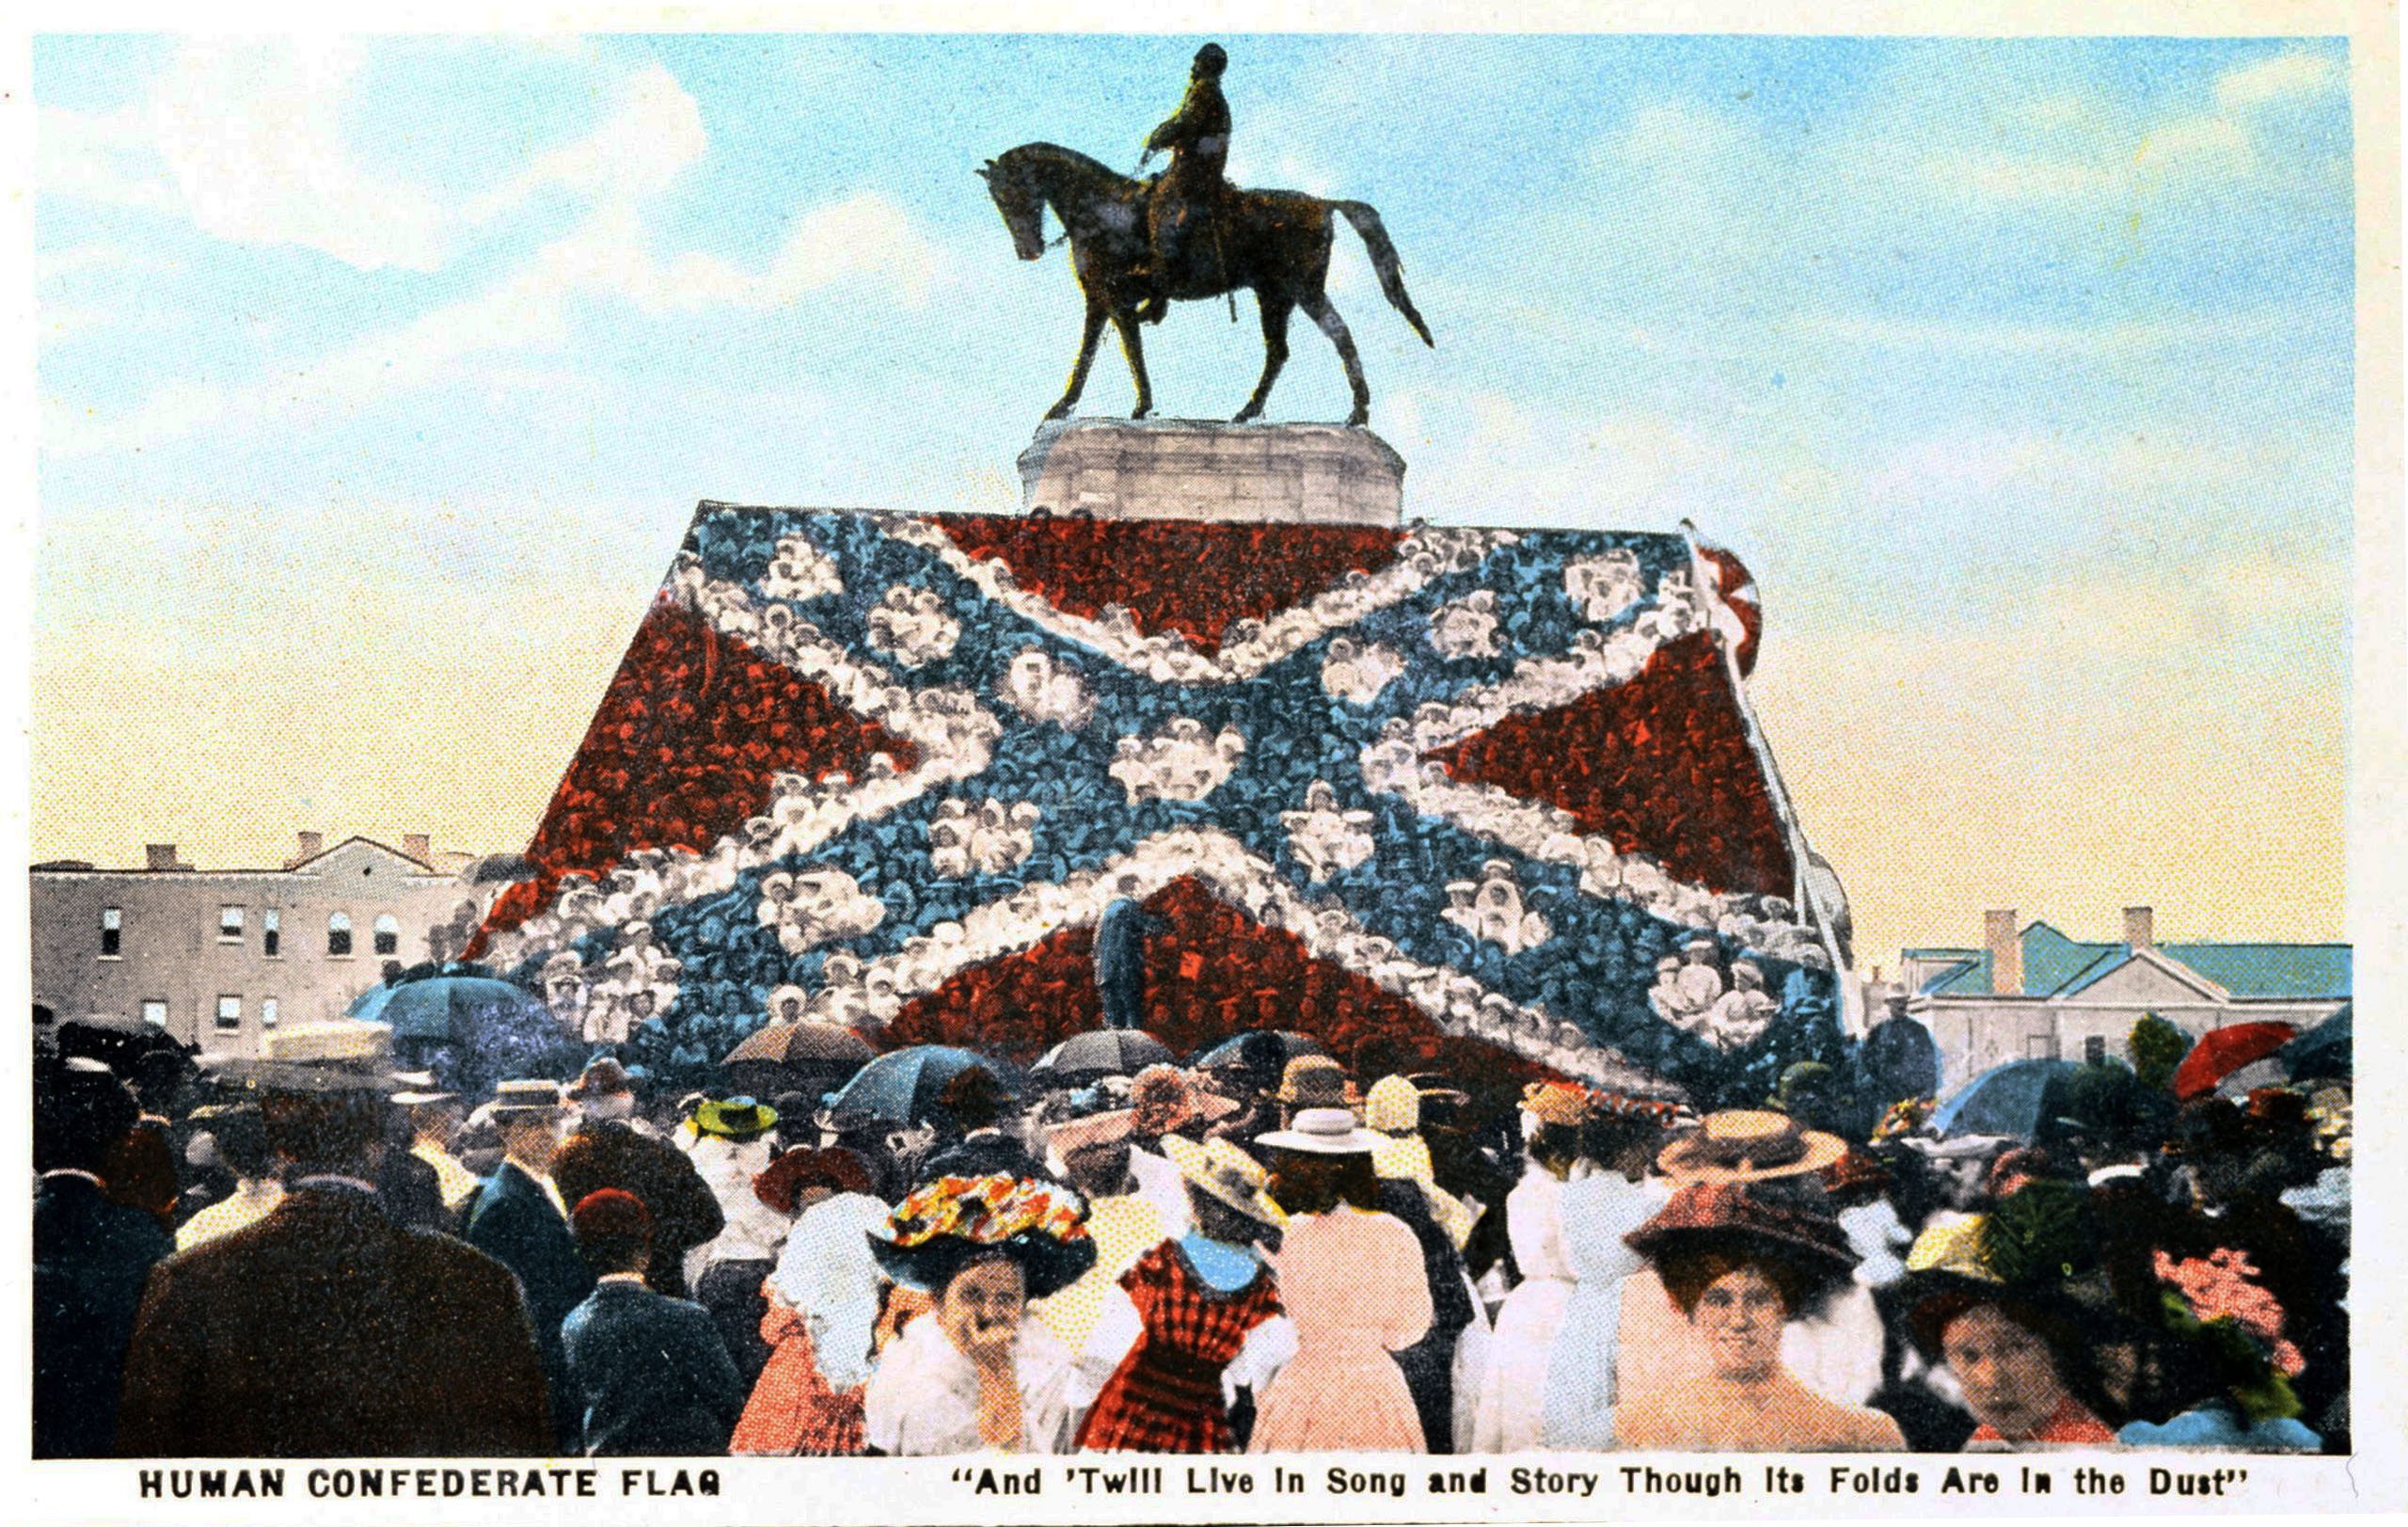 Postcard depicting a “human Confederate flag” created by arranging children at a Confederate Memorial Day celebration under the Robert E. Lee statue on Monument Avenue in Richmond. Huestis Pratt Cook, <em>Human Confederate Flag</em>, c. 1907, postcard (<a href="https://encyclopediavirginia.org/203hpr-ef4f6c5e5a15b4d/">Library of Virginia</a>)